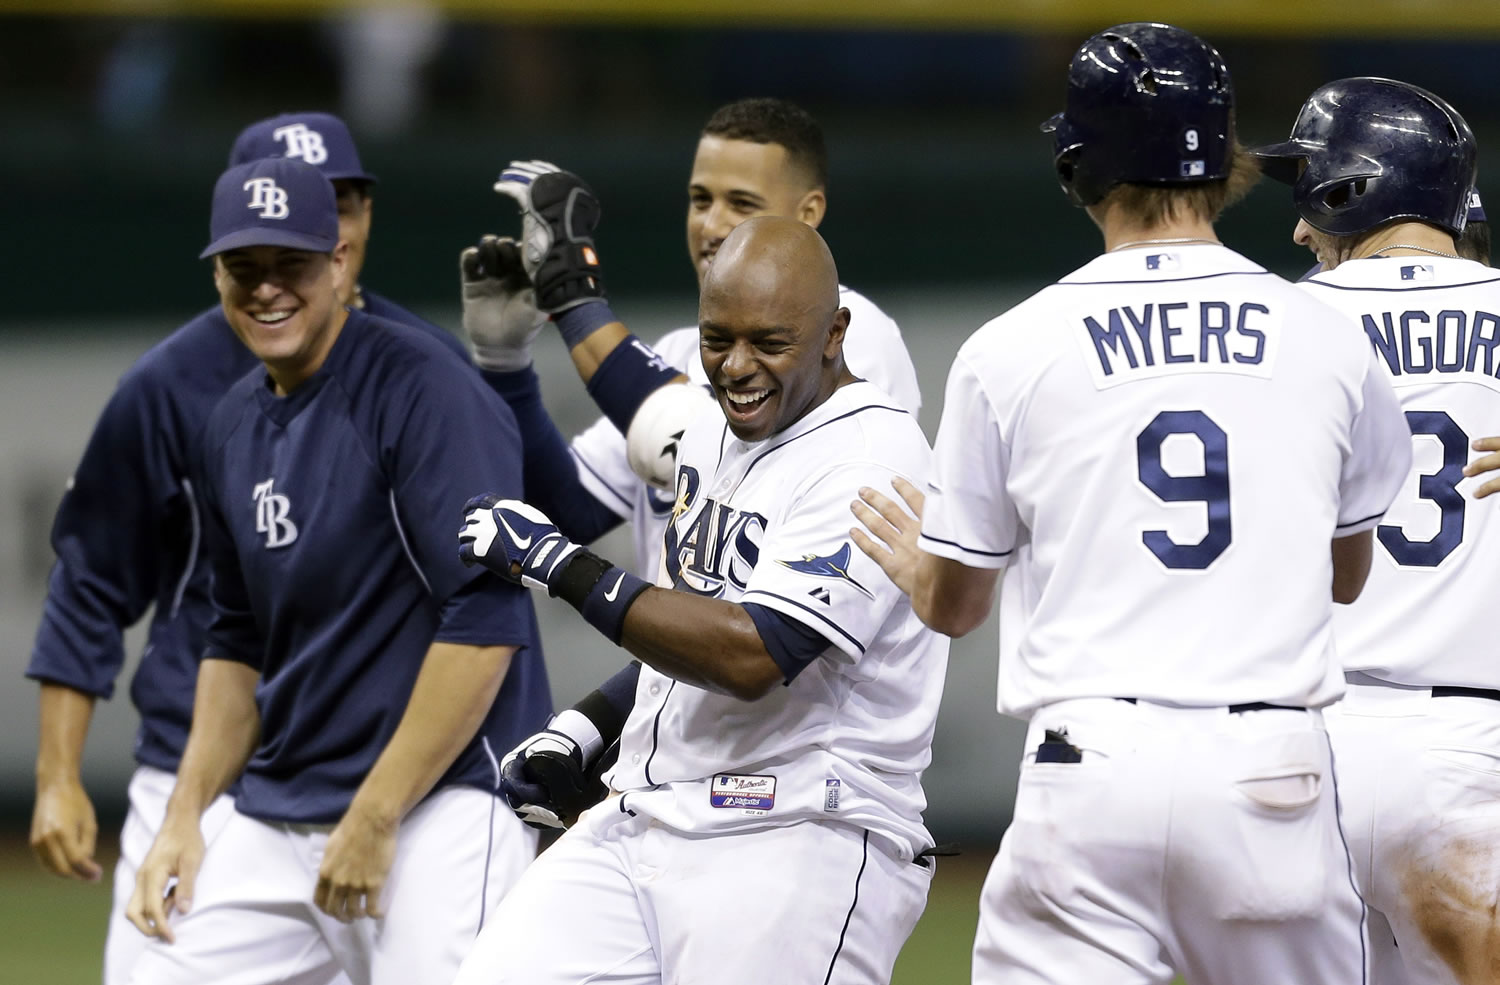 Tampa Bay Rays' Jason Bourgeois, center, celebrates with teammates after his ninth inning walk off hit off Seattle Mariners relief pitcher Danny Farquhar during a baseball game Wednesday, Aug. 14, 2013, in St. Petersburg, Fla. Rays' Matt Joyce scored on the hit.  The Rays won the game 5-4.